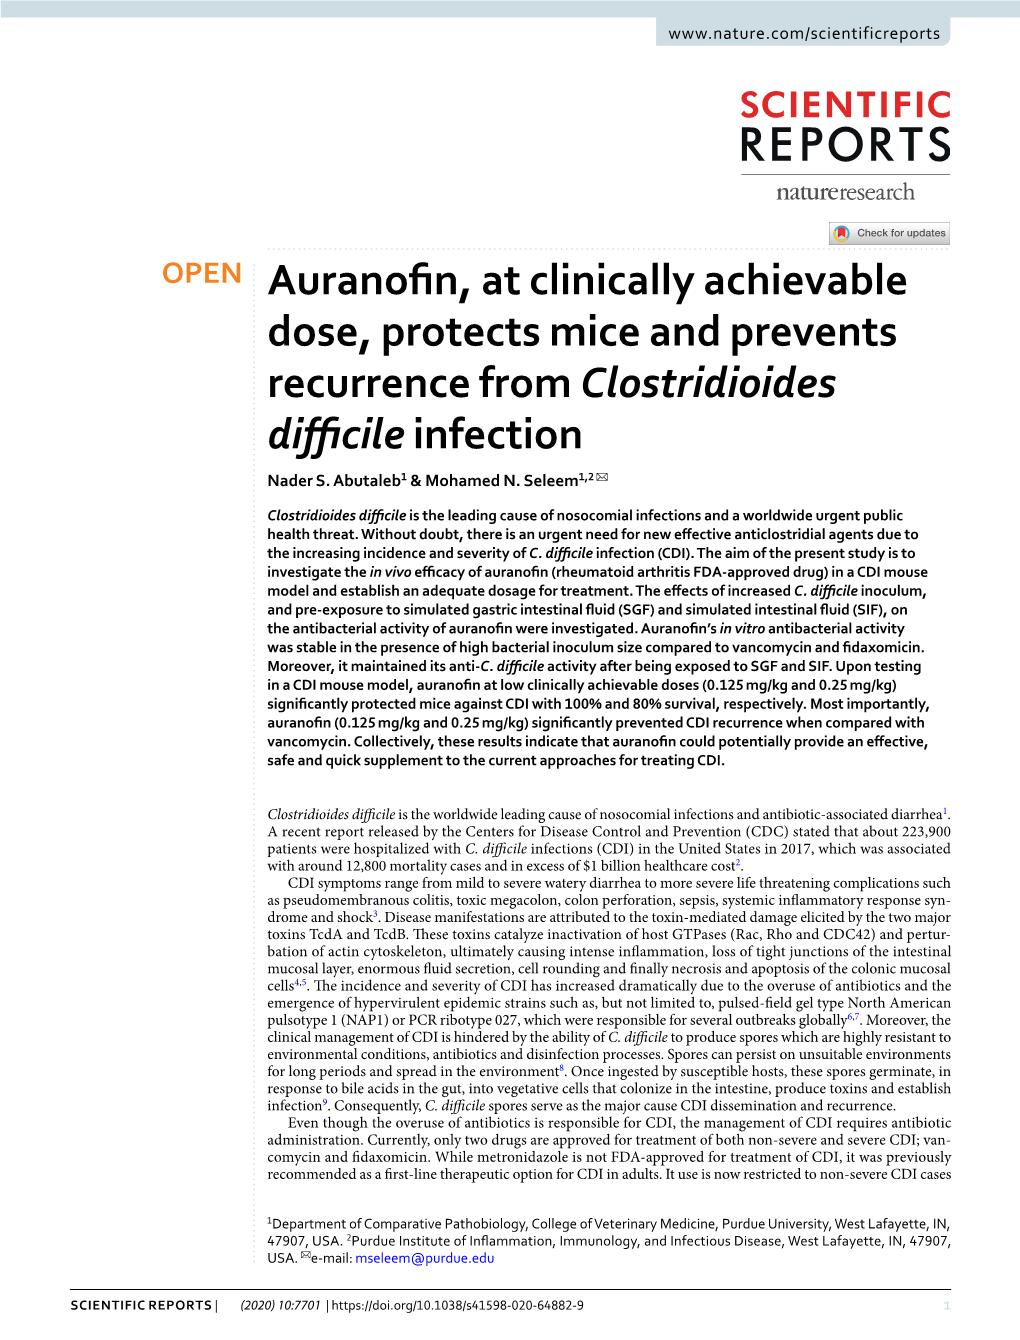 Auranofin, at Clinically Achievable Dose, Protects Mice and Prevents